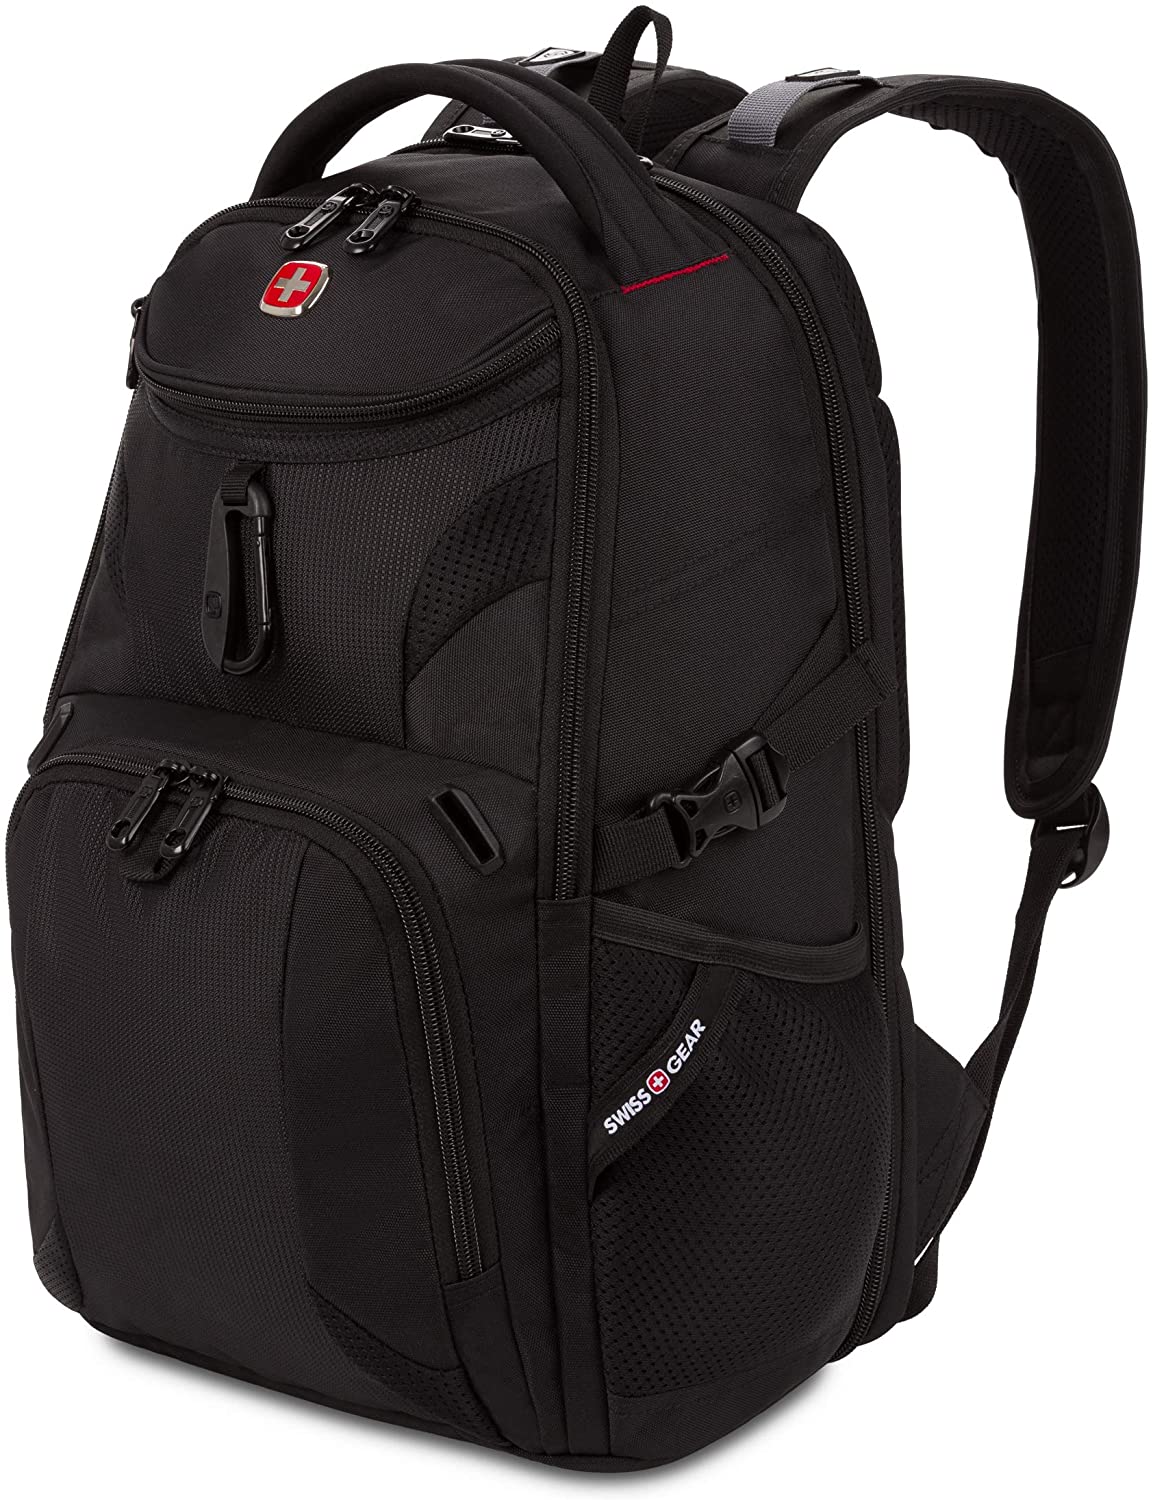 Best laptop backpacks and bags 2022